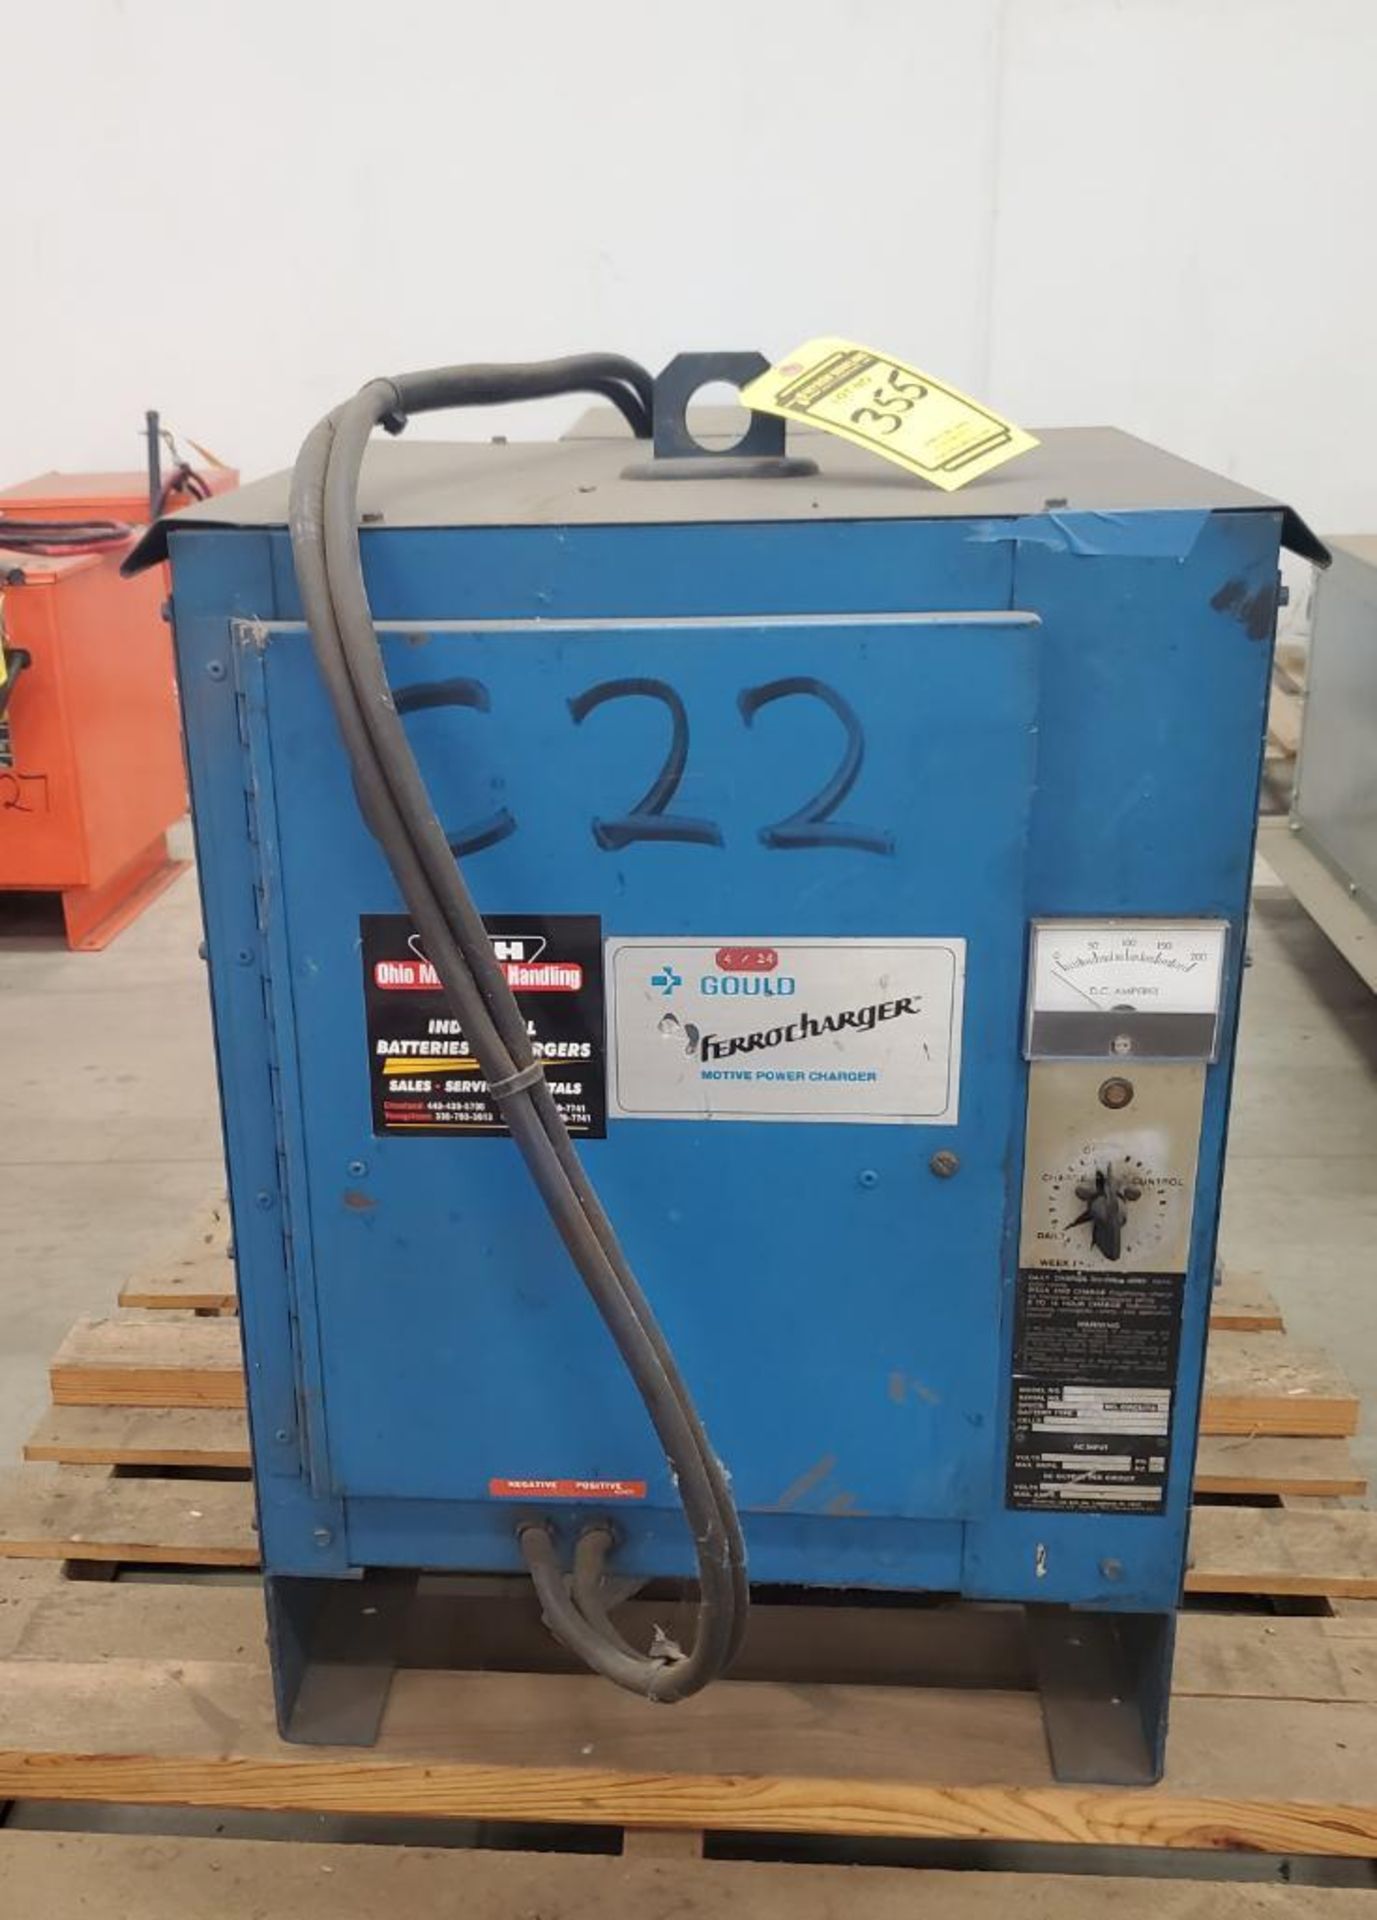 FERRO CHARGER; MODEL GFC12-785SI, S/N 77CS01166C, BATTERY TYPE LA, 12-CELLS ***LOCATED AT 13000